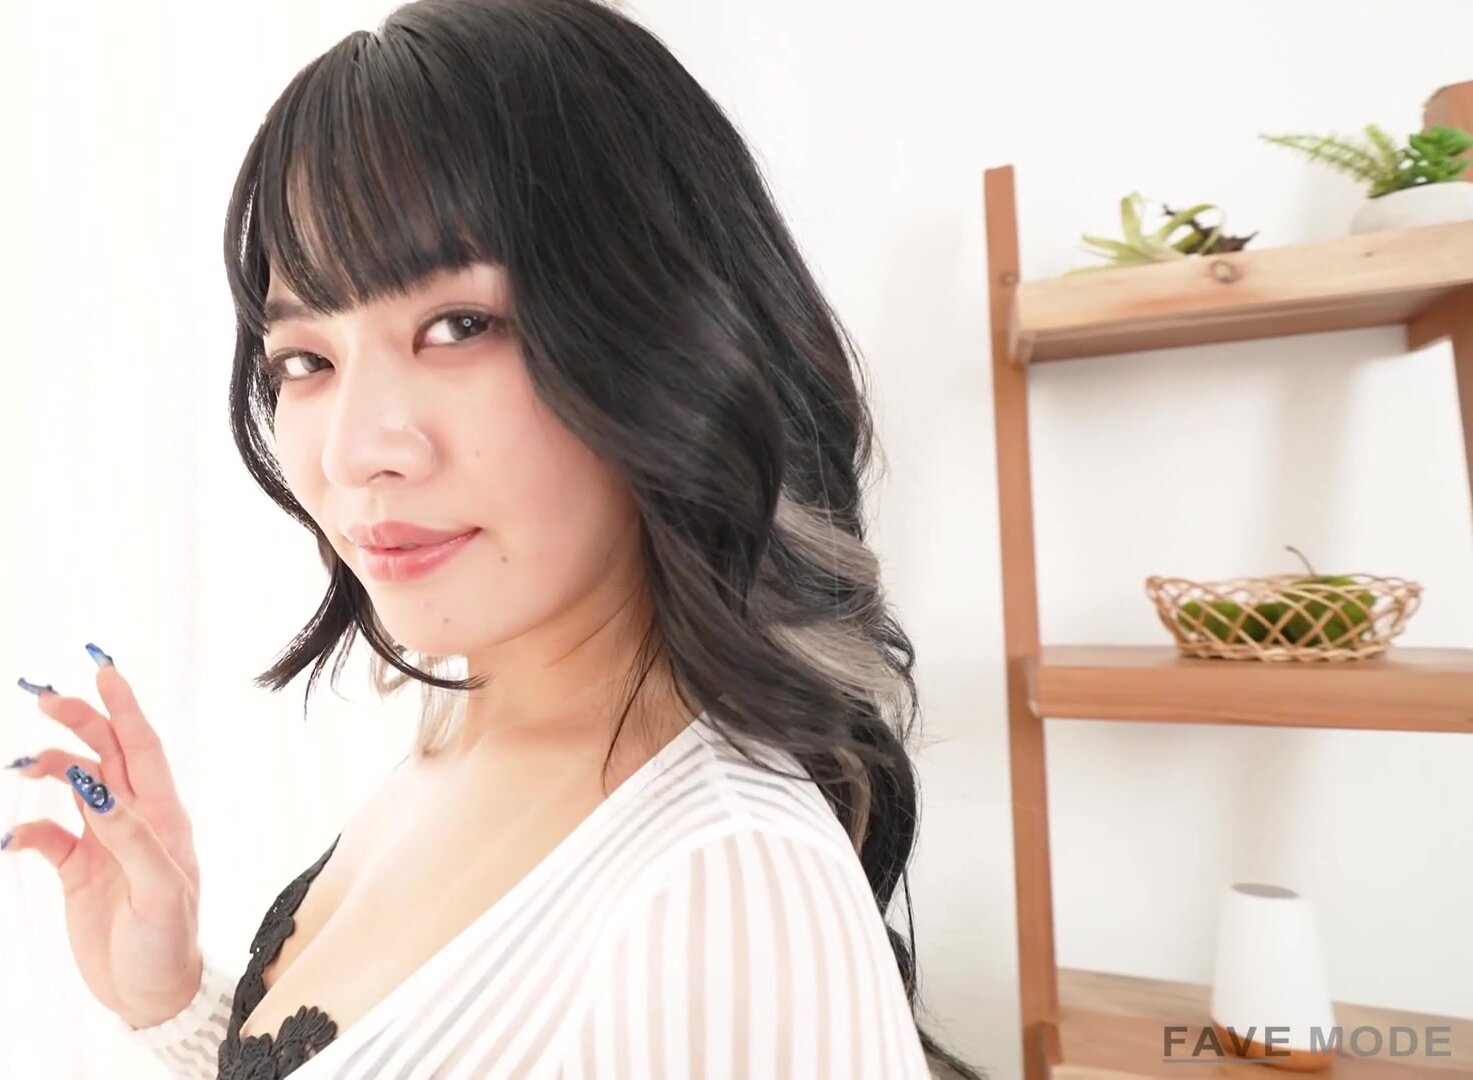 734POMD-004 [Amateur POV] While staring at each other f